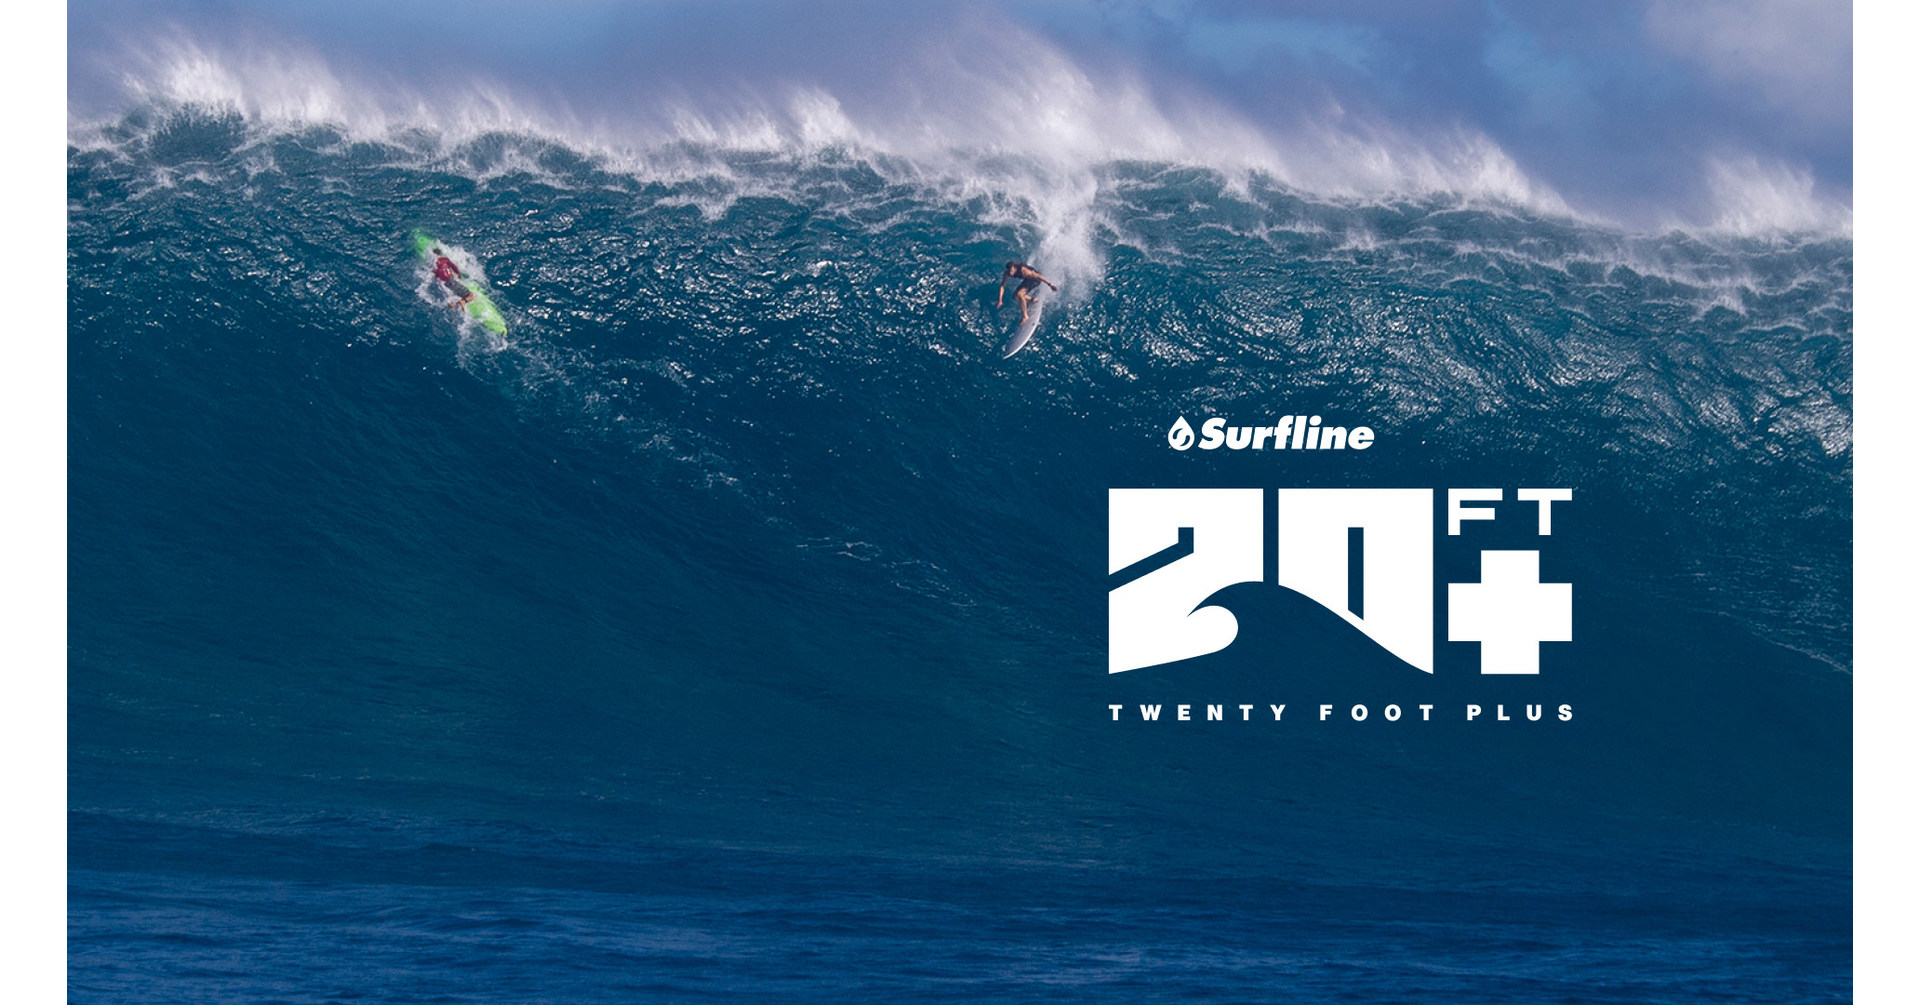 Surfline, Red Bull and Heavy Water Join Forces to Document and Recognize Big-Wave Surfers in "Twenty Foot Plus"